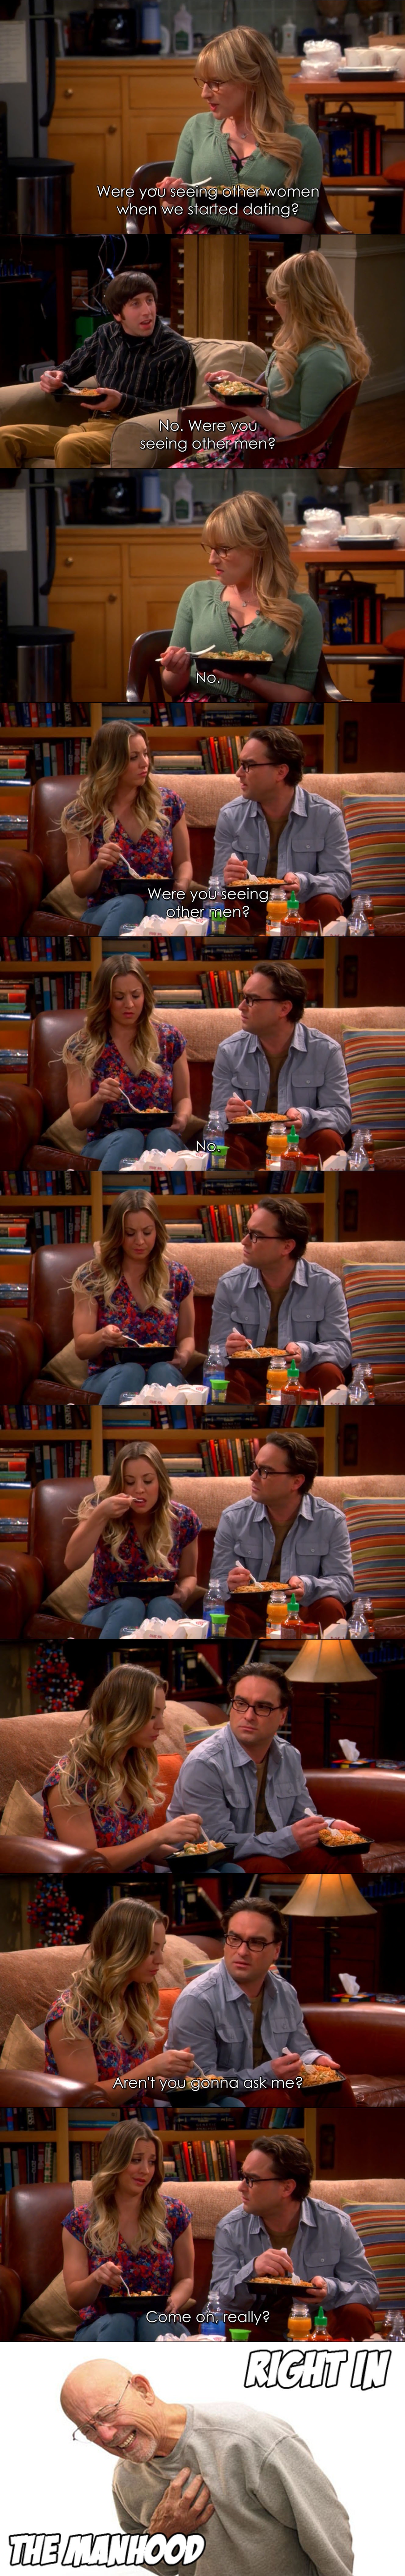 funny-picture-the-big-bang-theory-date